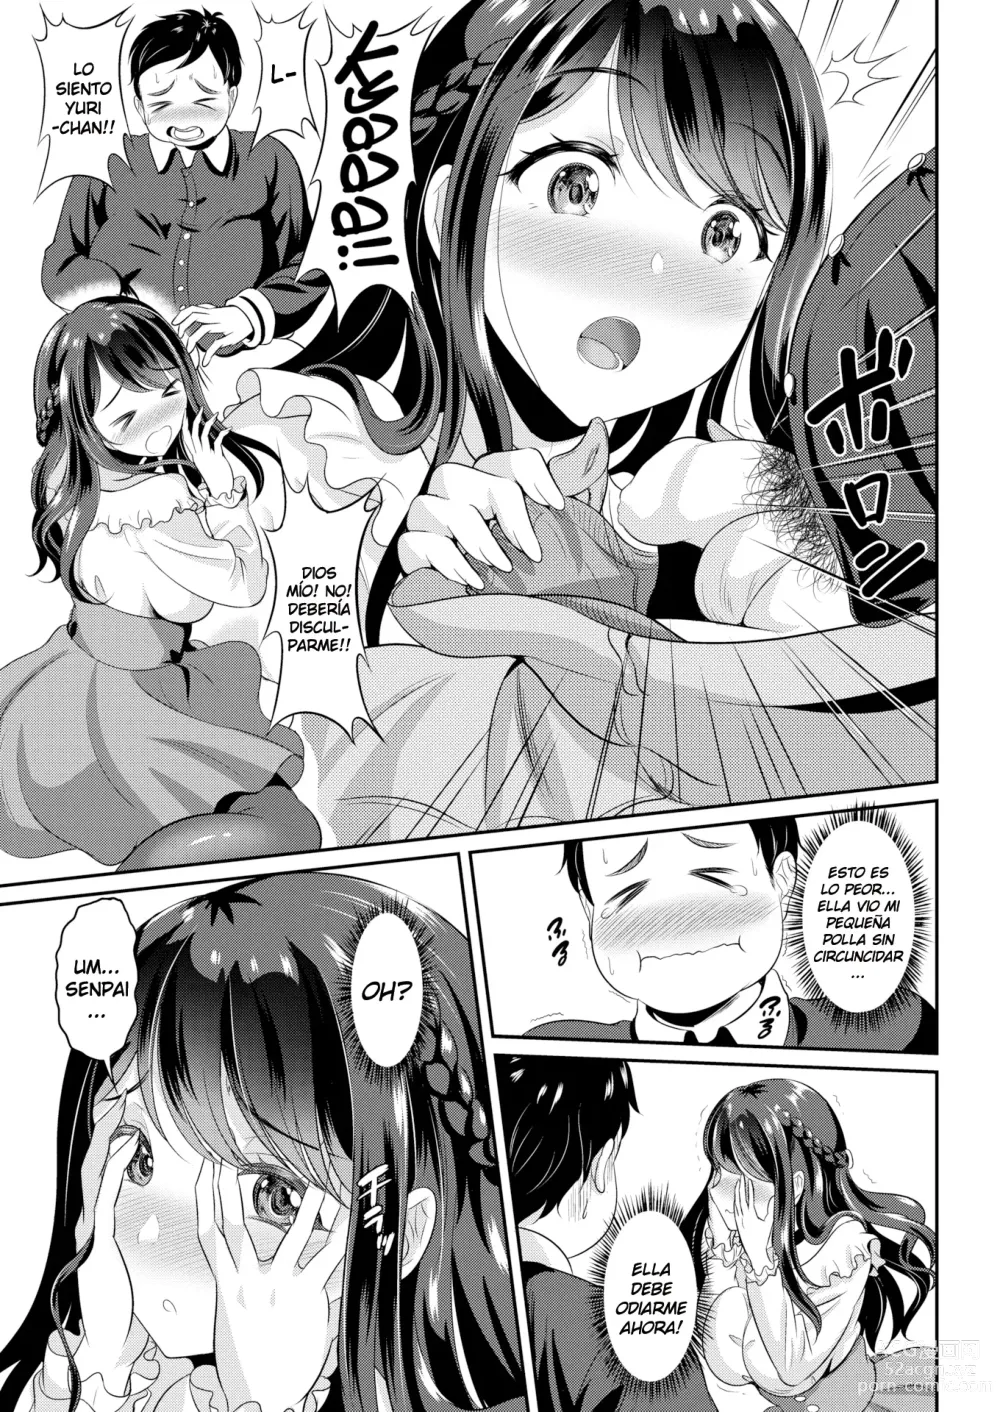 Page 3 of doujinshi Perfect ♥ Fit